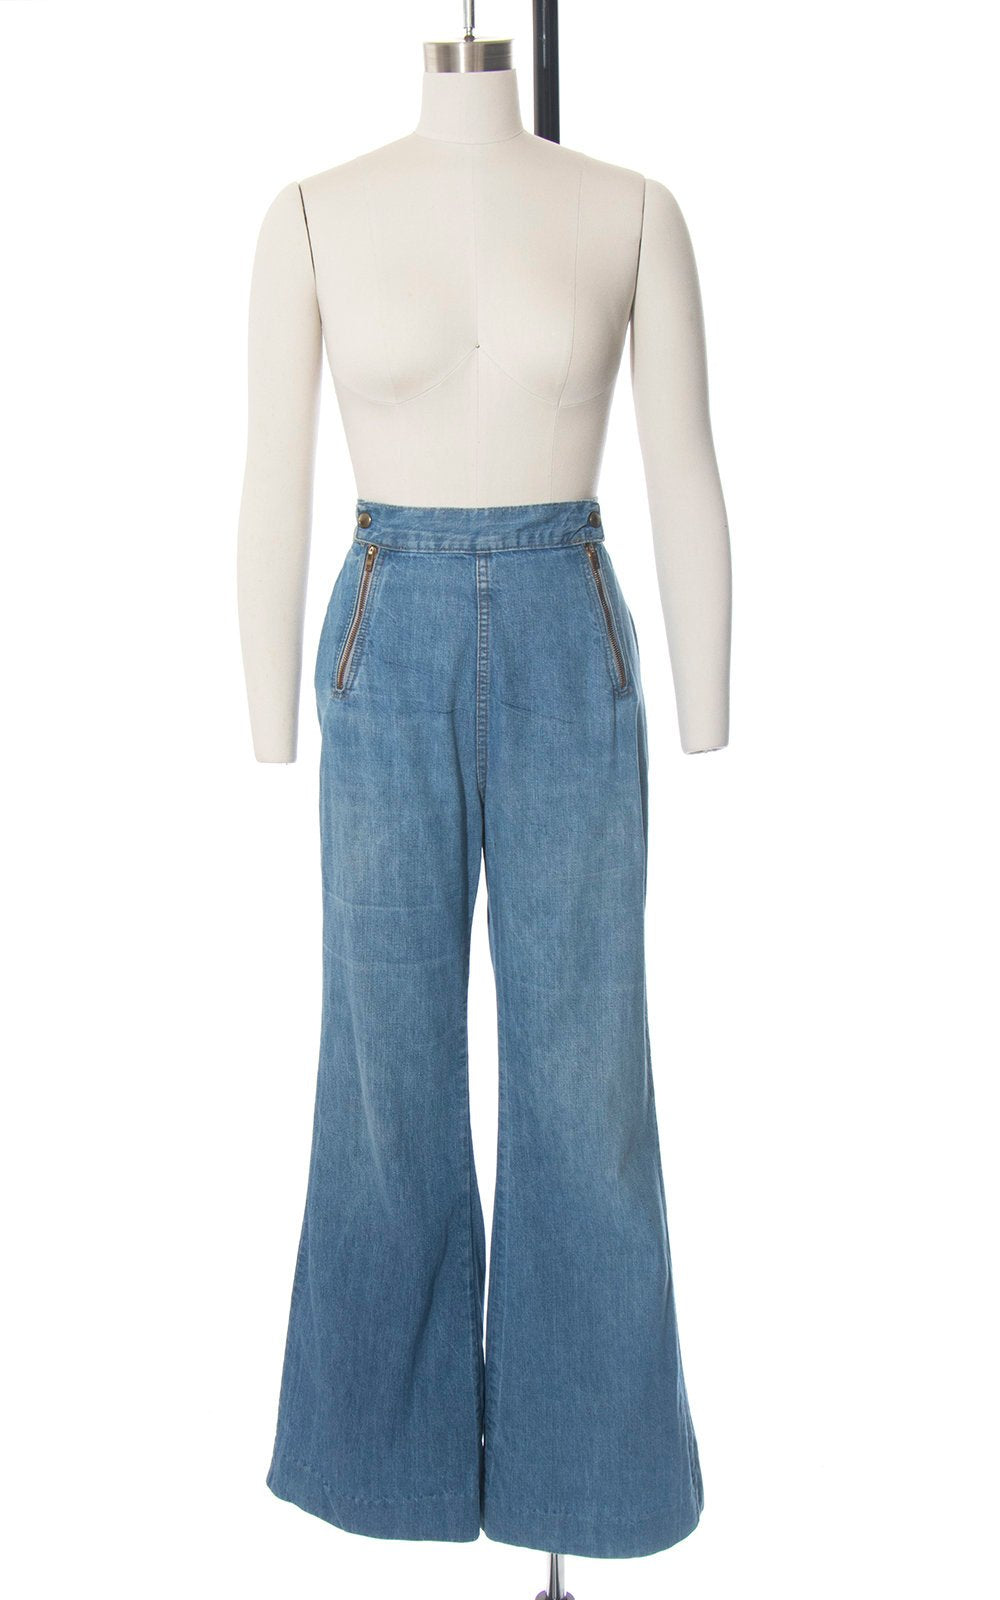 Vintage 1970s Bell Bottoms | 70s Double Zippered Light Blue Wash Denim Jeans High Waisted Distressed Flared Pants (medium)